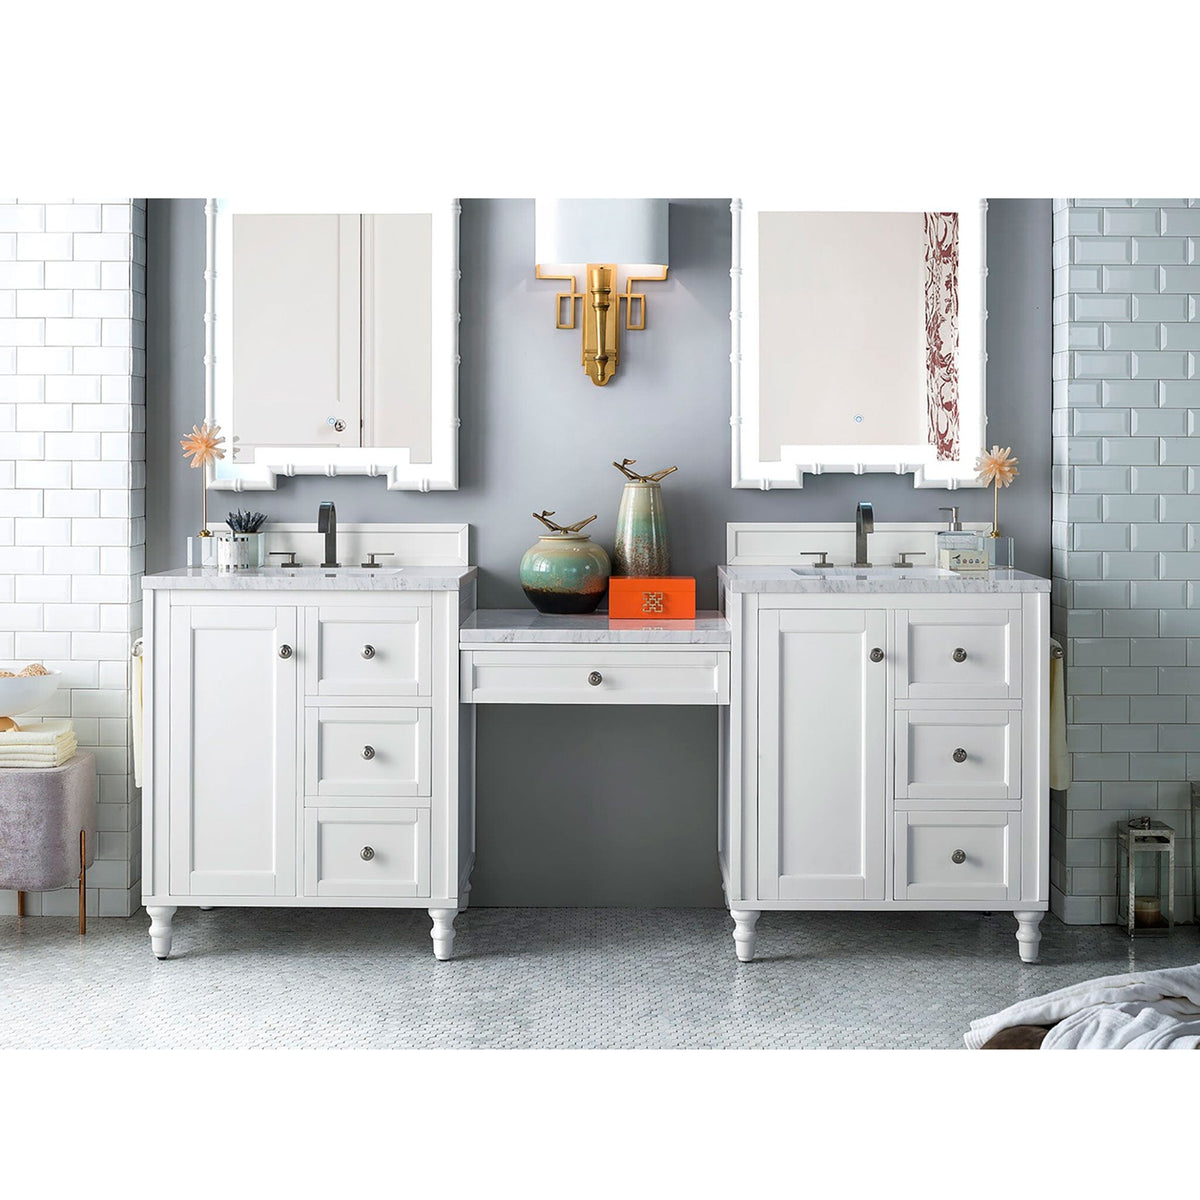 86" Copper Cove Encore Double Bathroom Vanity with Makeup Counter, Bright White